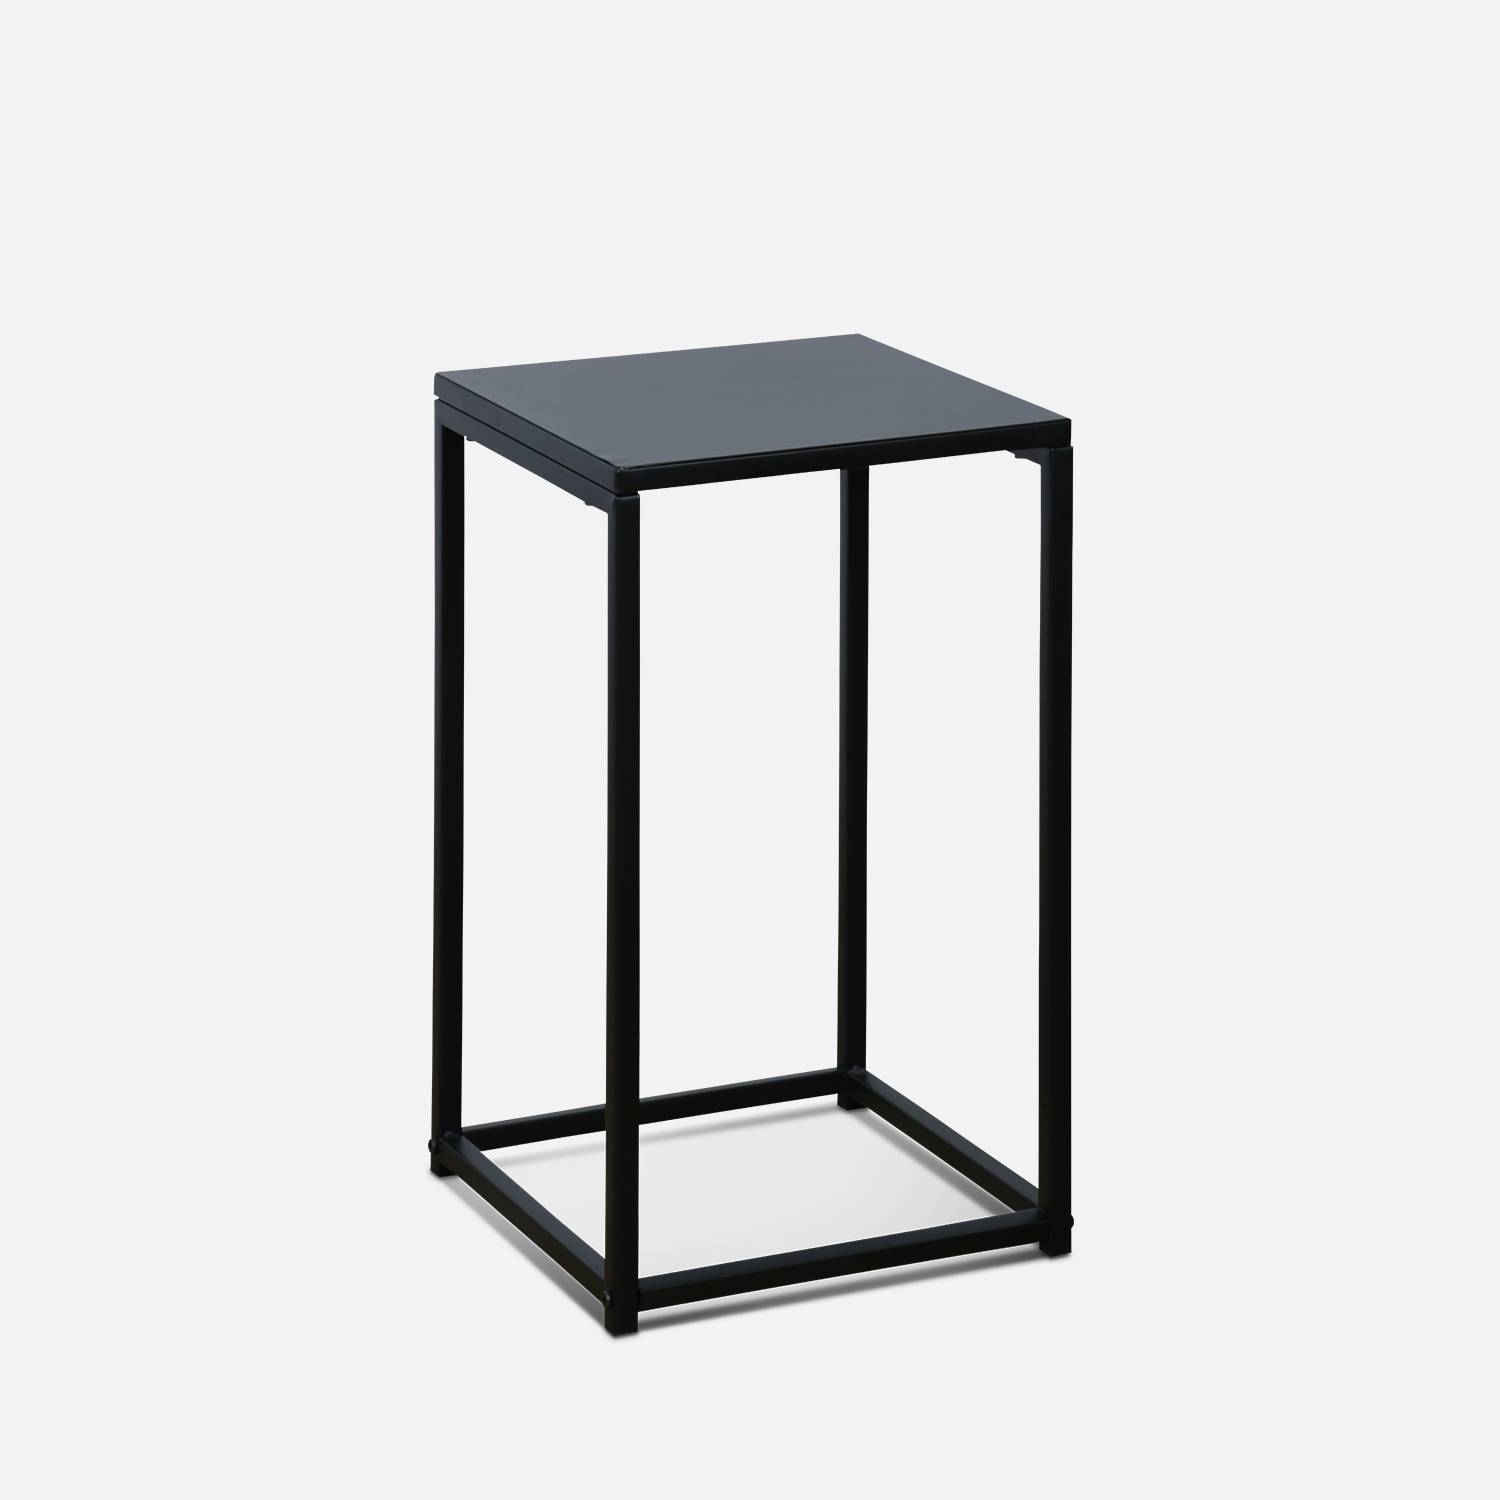 Set of 2 side tables/ end of sofa , Industrielle, Black,sweeek,Photo5